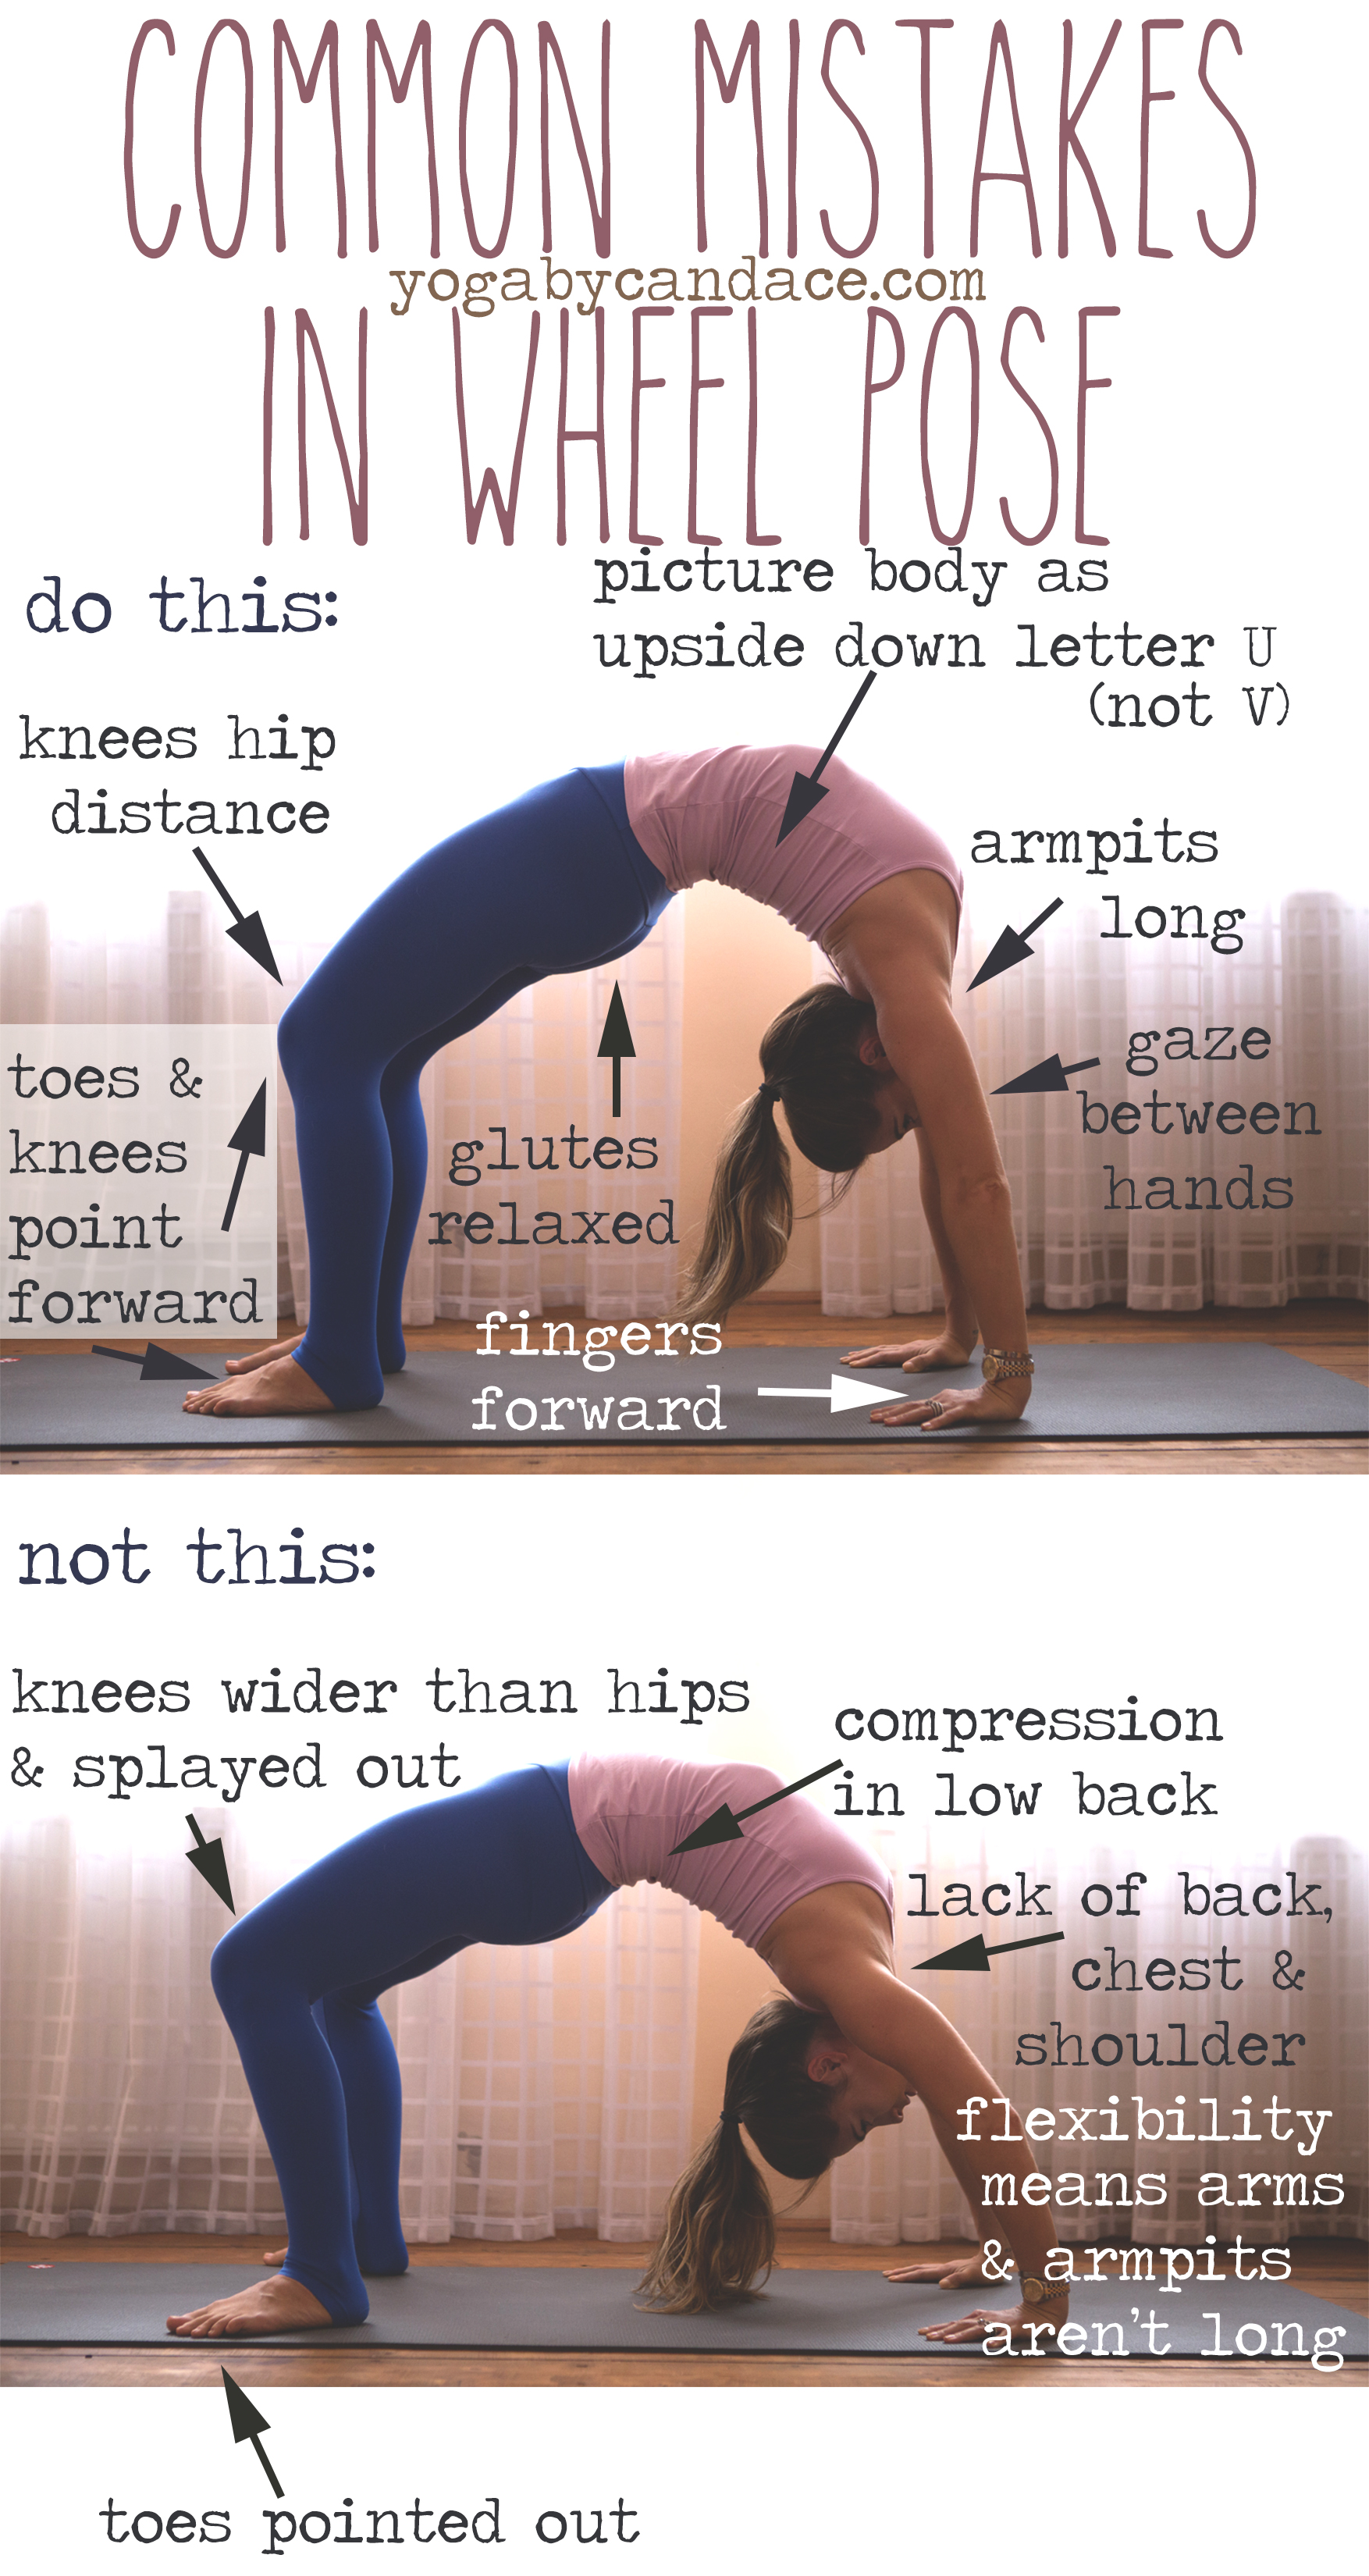 12 Poses To Try With A Yoga Wheel - YOGA PRACTICE